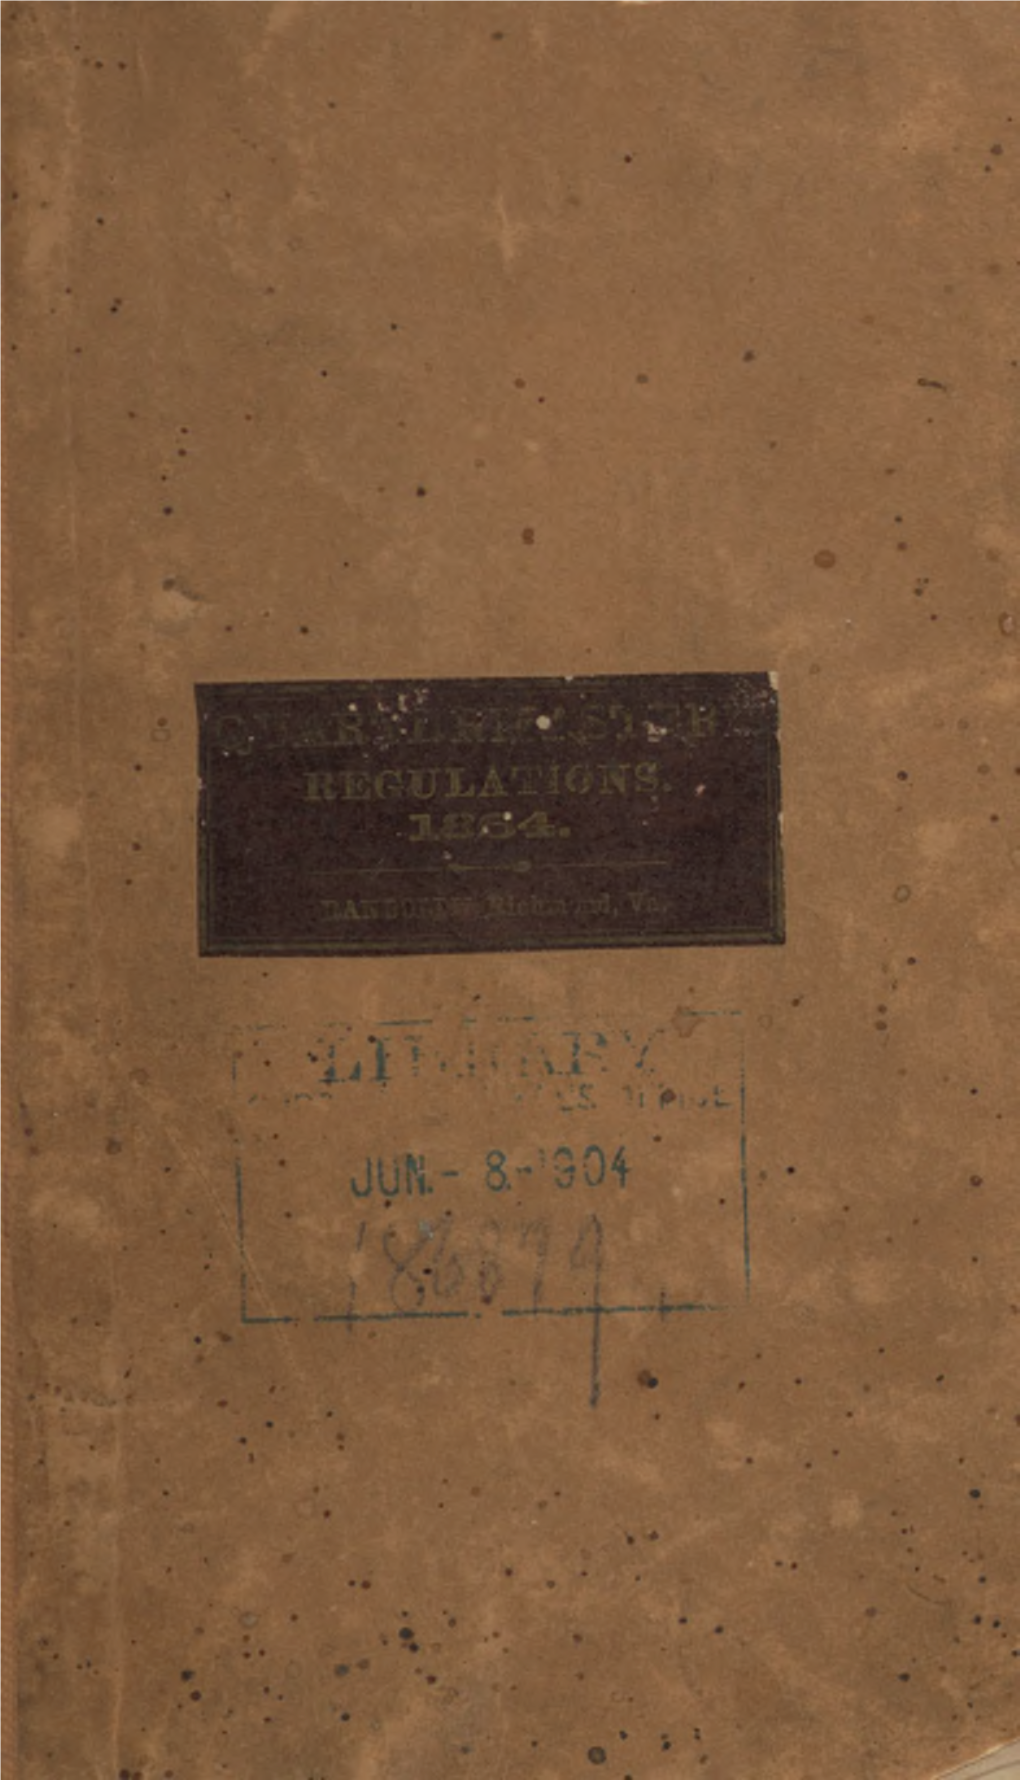 Regulations of the Confederate States Army for the Quartermaster's